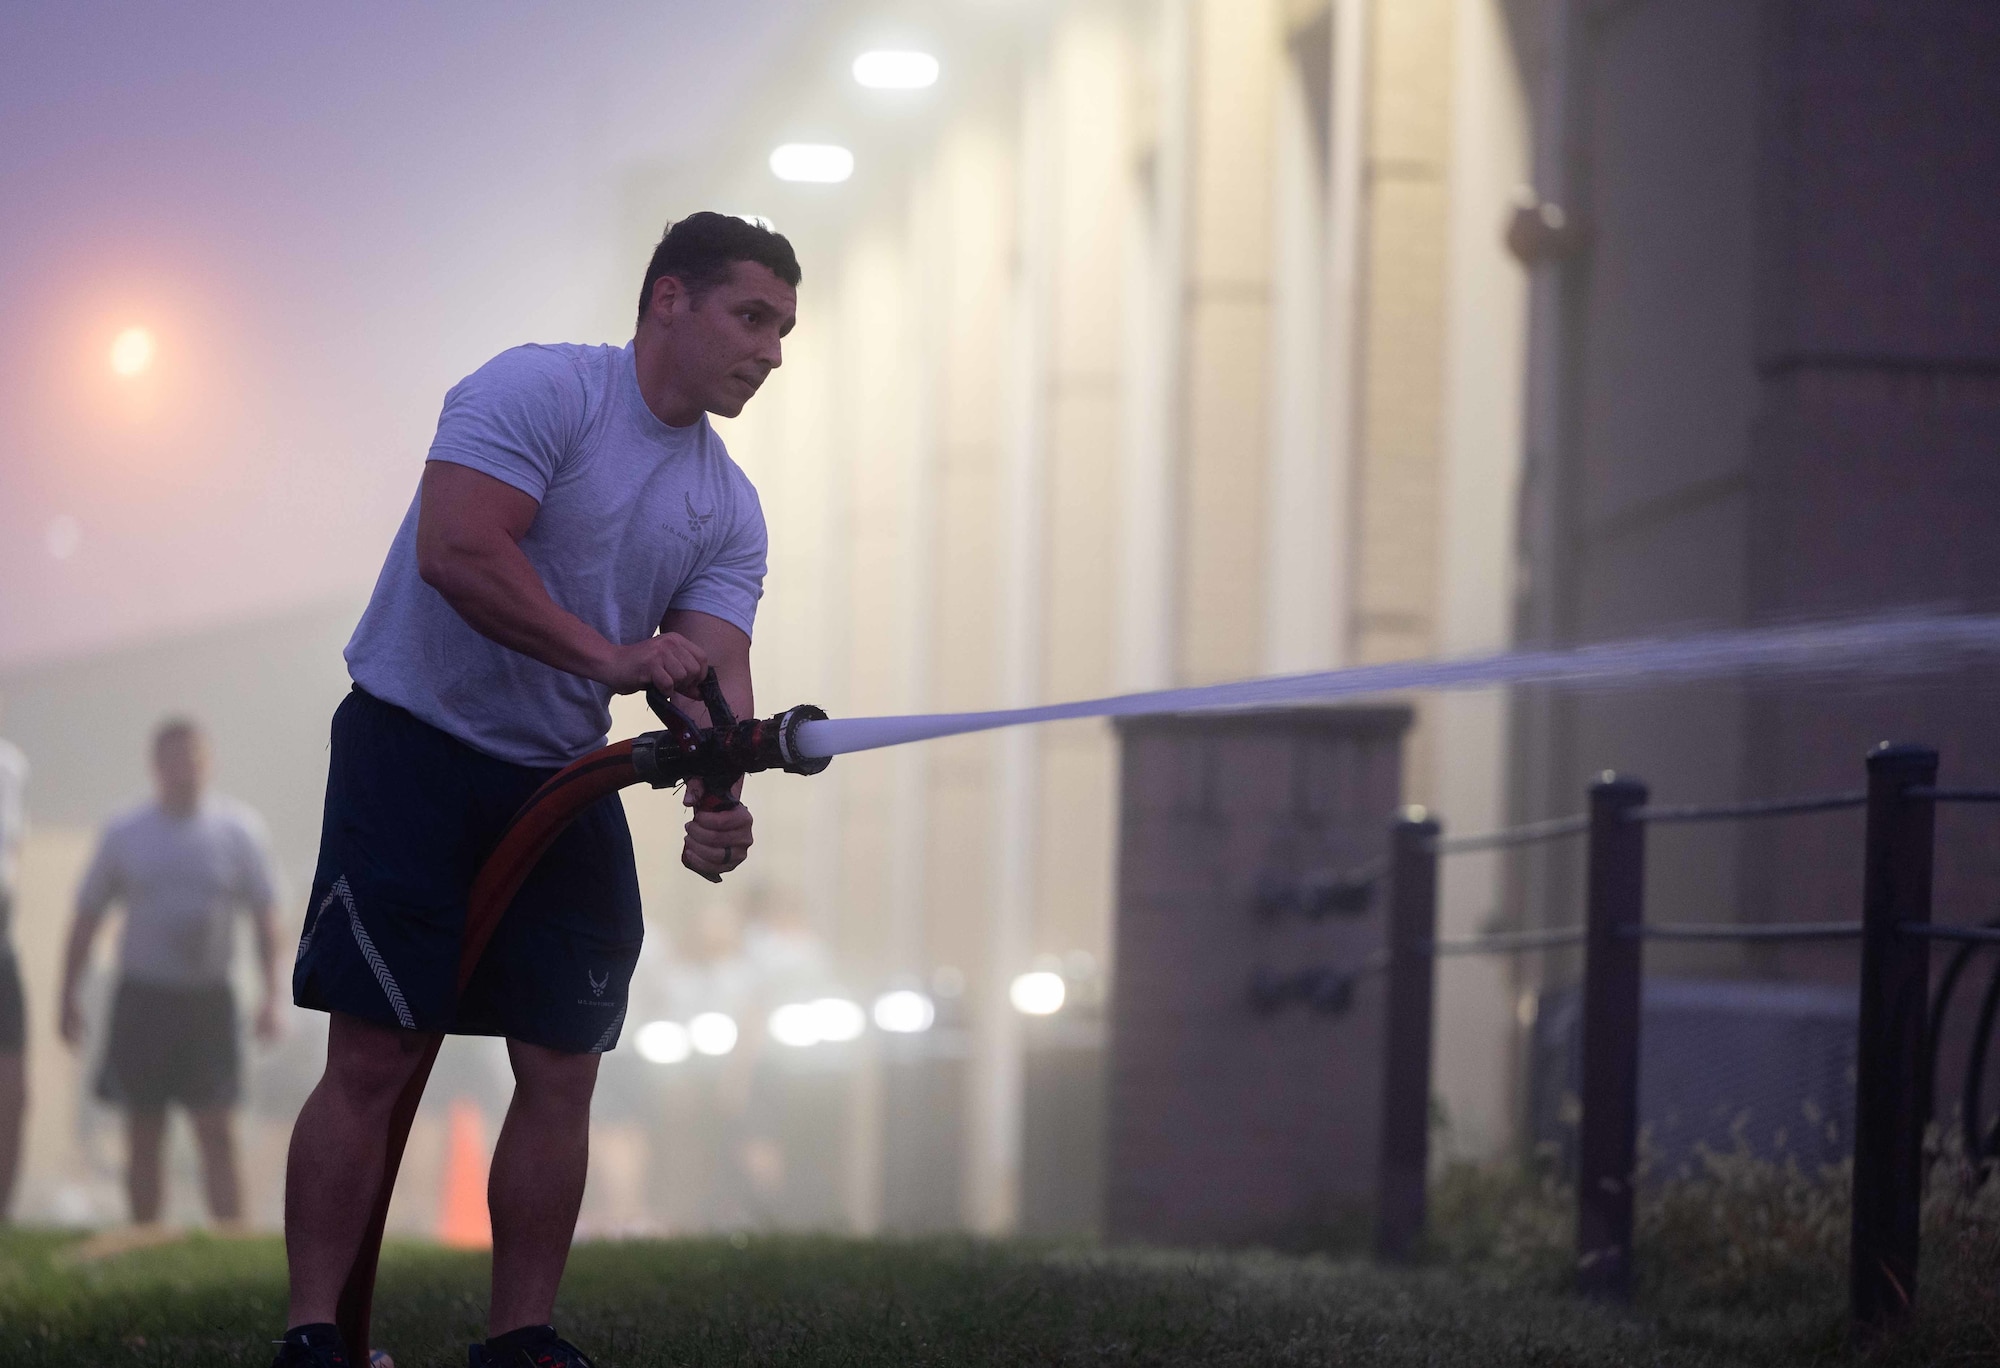 Staff Sgt. Jaheel Morales, 436th Civil Engineer Squadron engineering journeyman, sprays a firehose during a physical training session at the firehouse on Dover Air Force Base, Delaware, Oct. 14, 2021. The Dover AFB fire department hosted a firefighter centric workout for squadron members that featured farmer carries, hose drags and ladder climbs, as part of Fire Prevention Week 2021. (U.S. Air Force photo by Senior Airman Faith Schaefer)